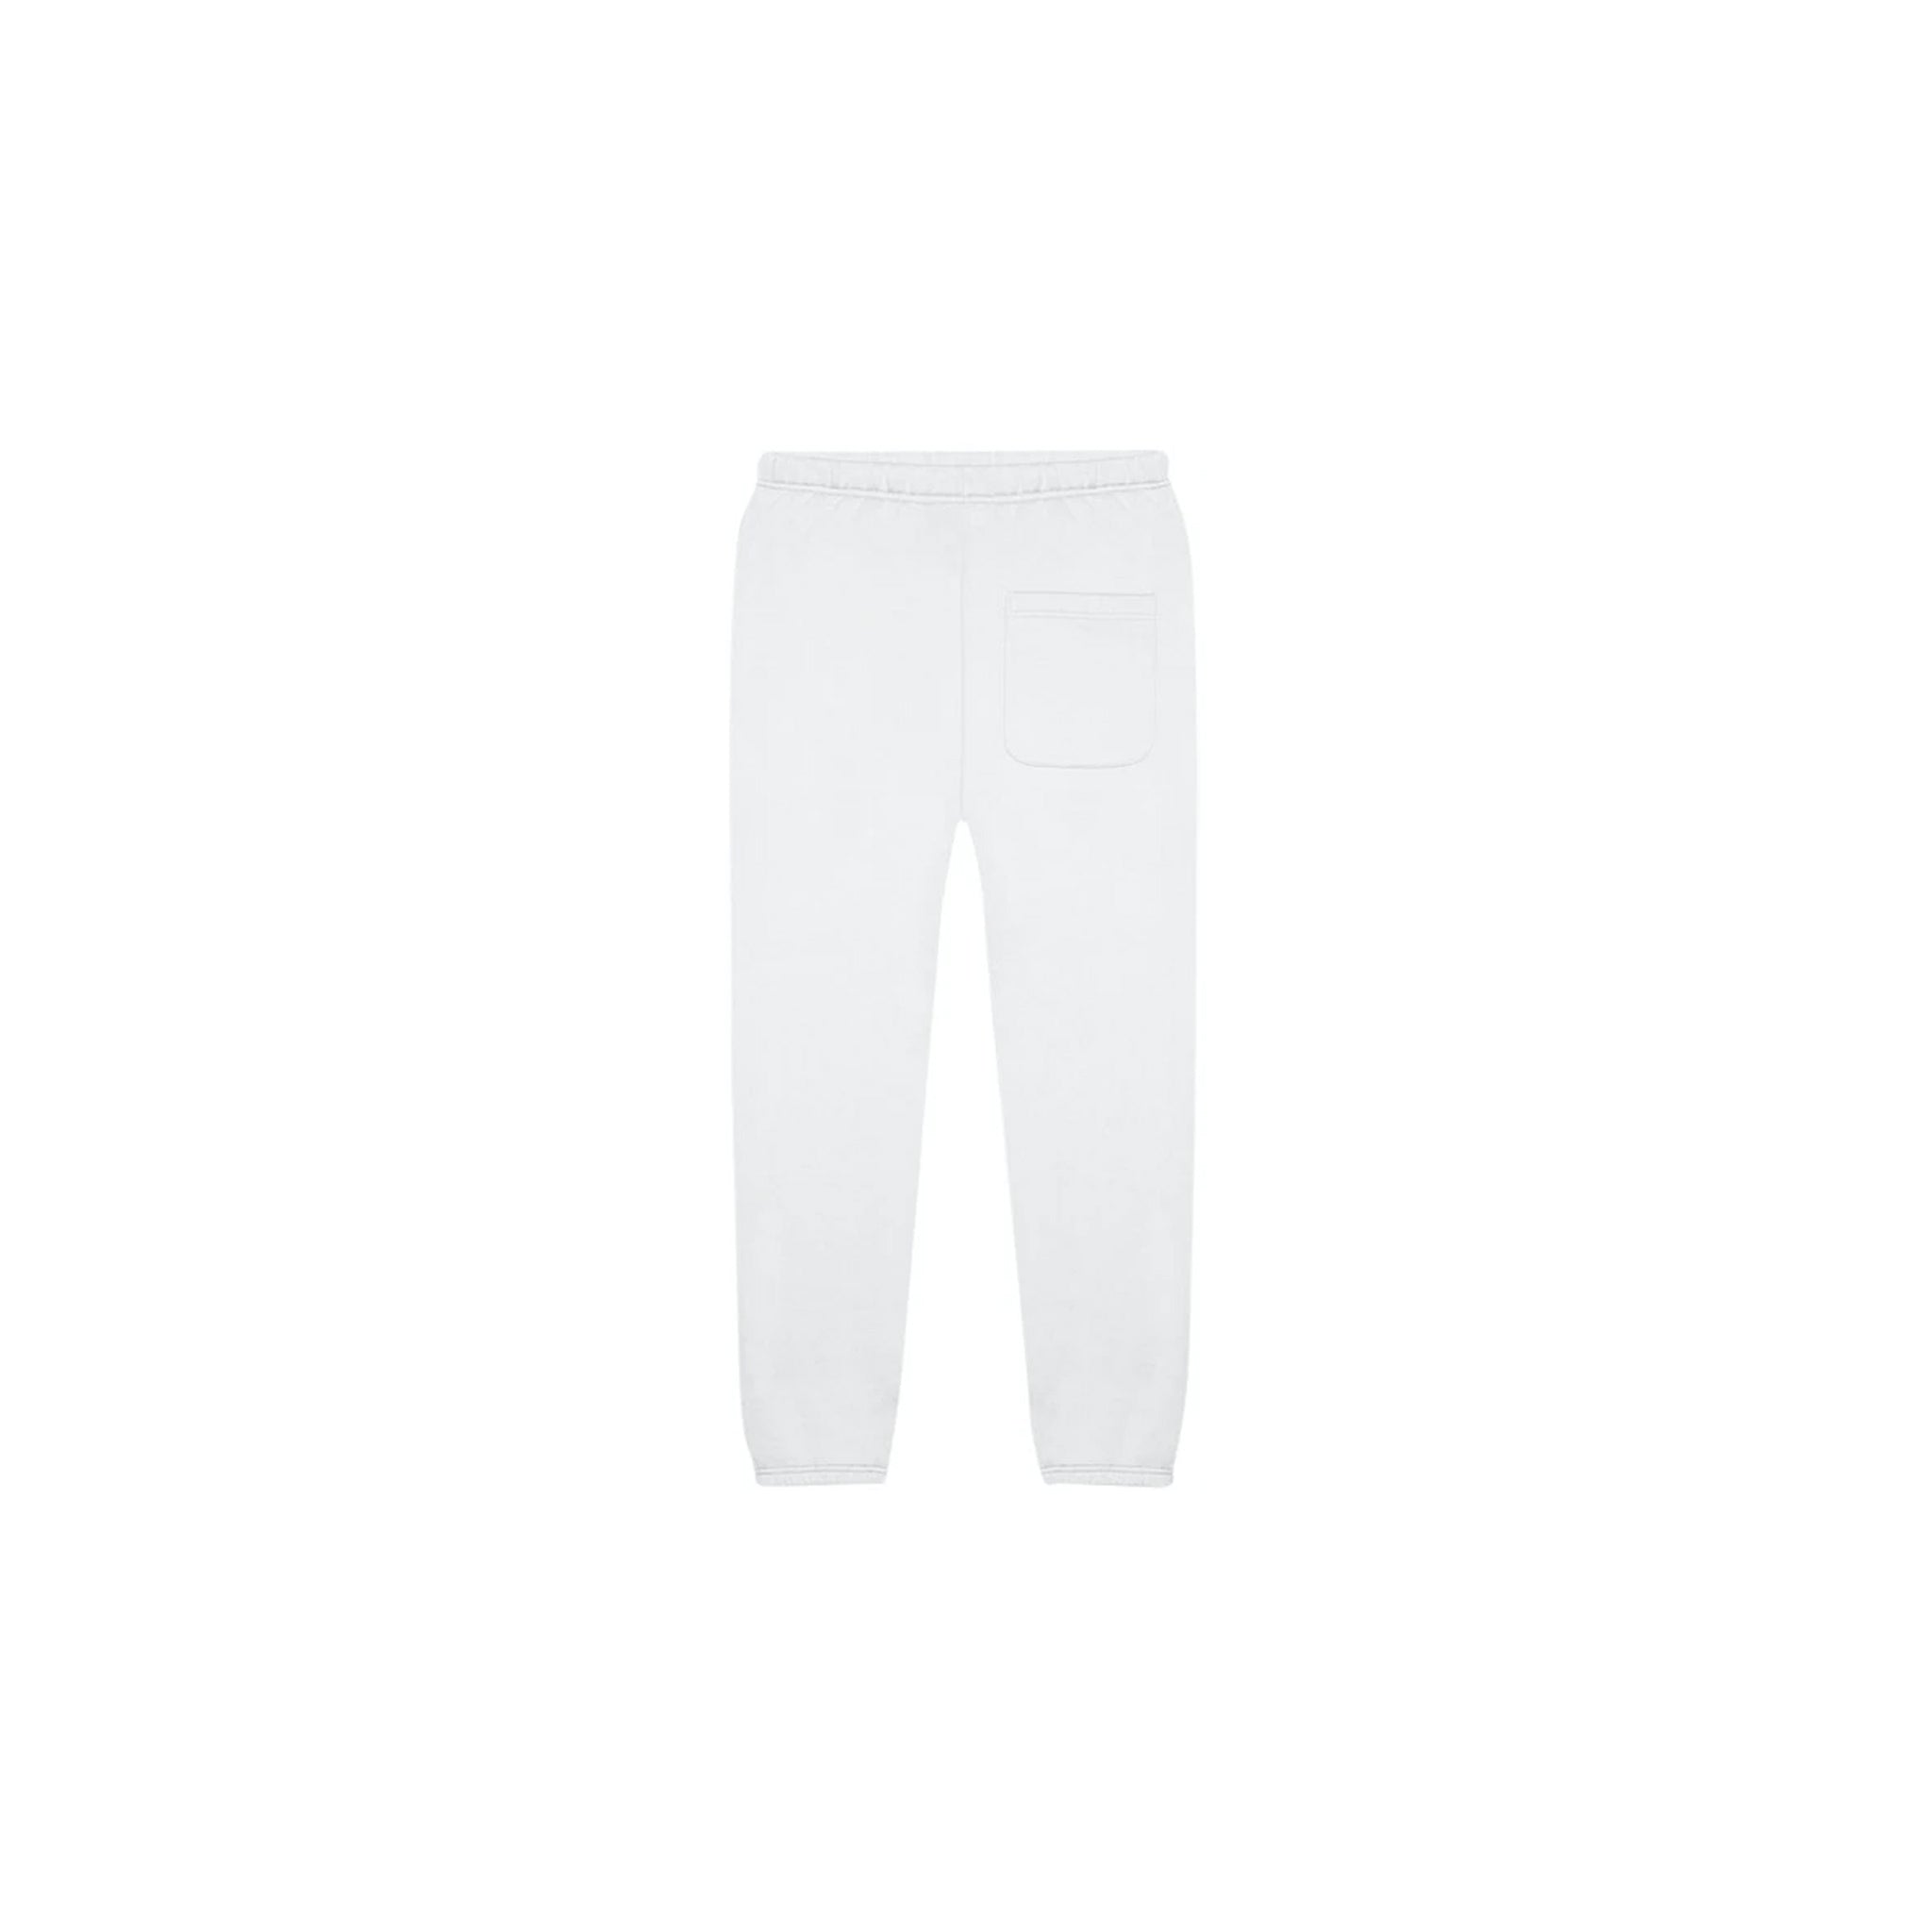 FEAR OF GOD ESSENTIALS SWEATPANTS (SS20) WHITE